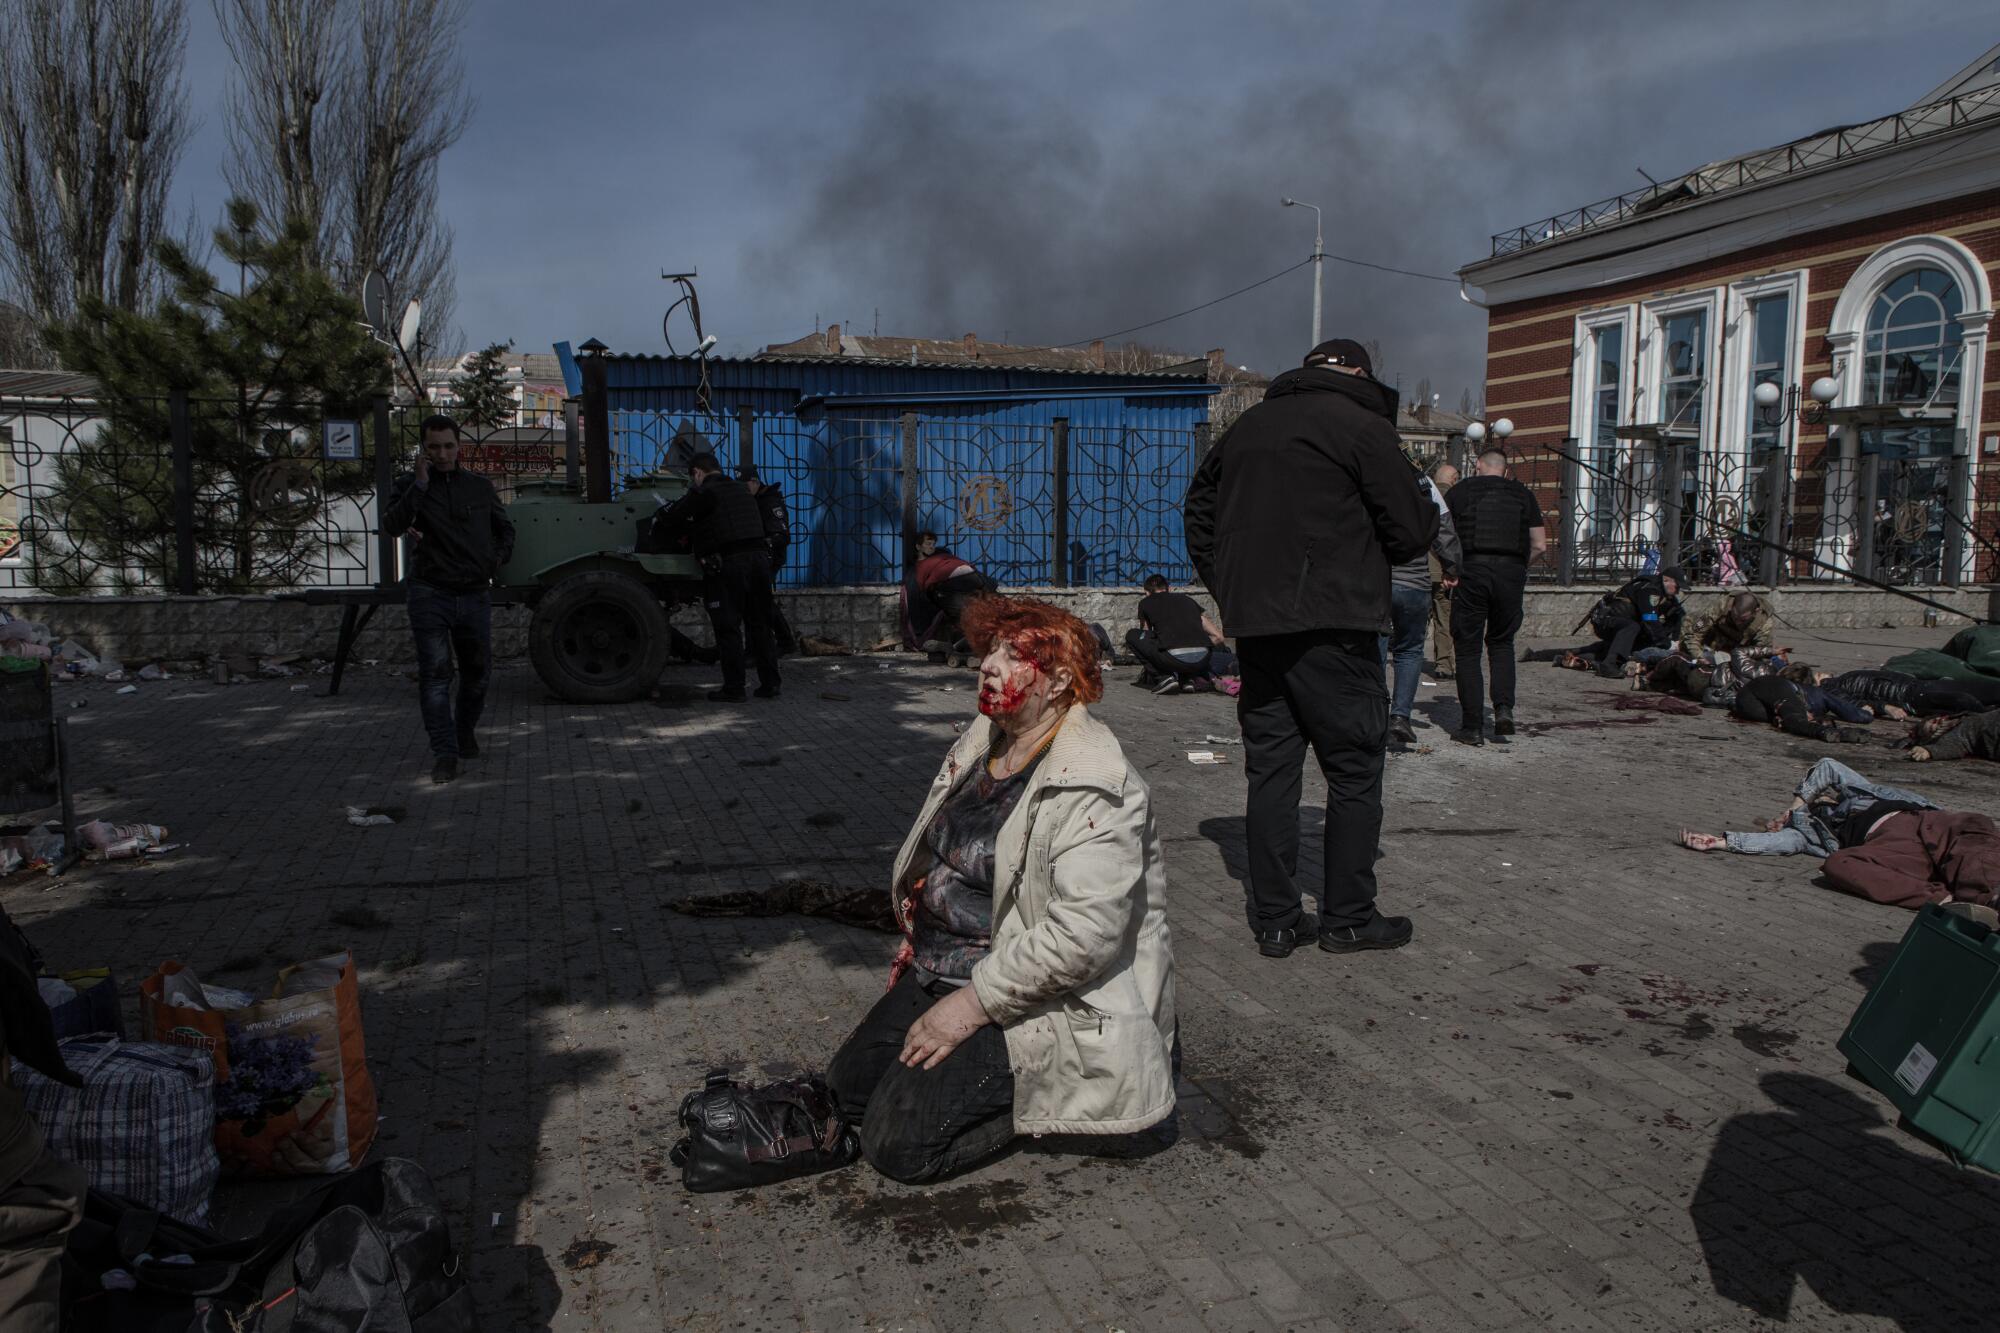 An injured person kneels on the ground after the attack on a Ukrainian train station.